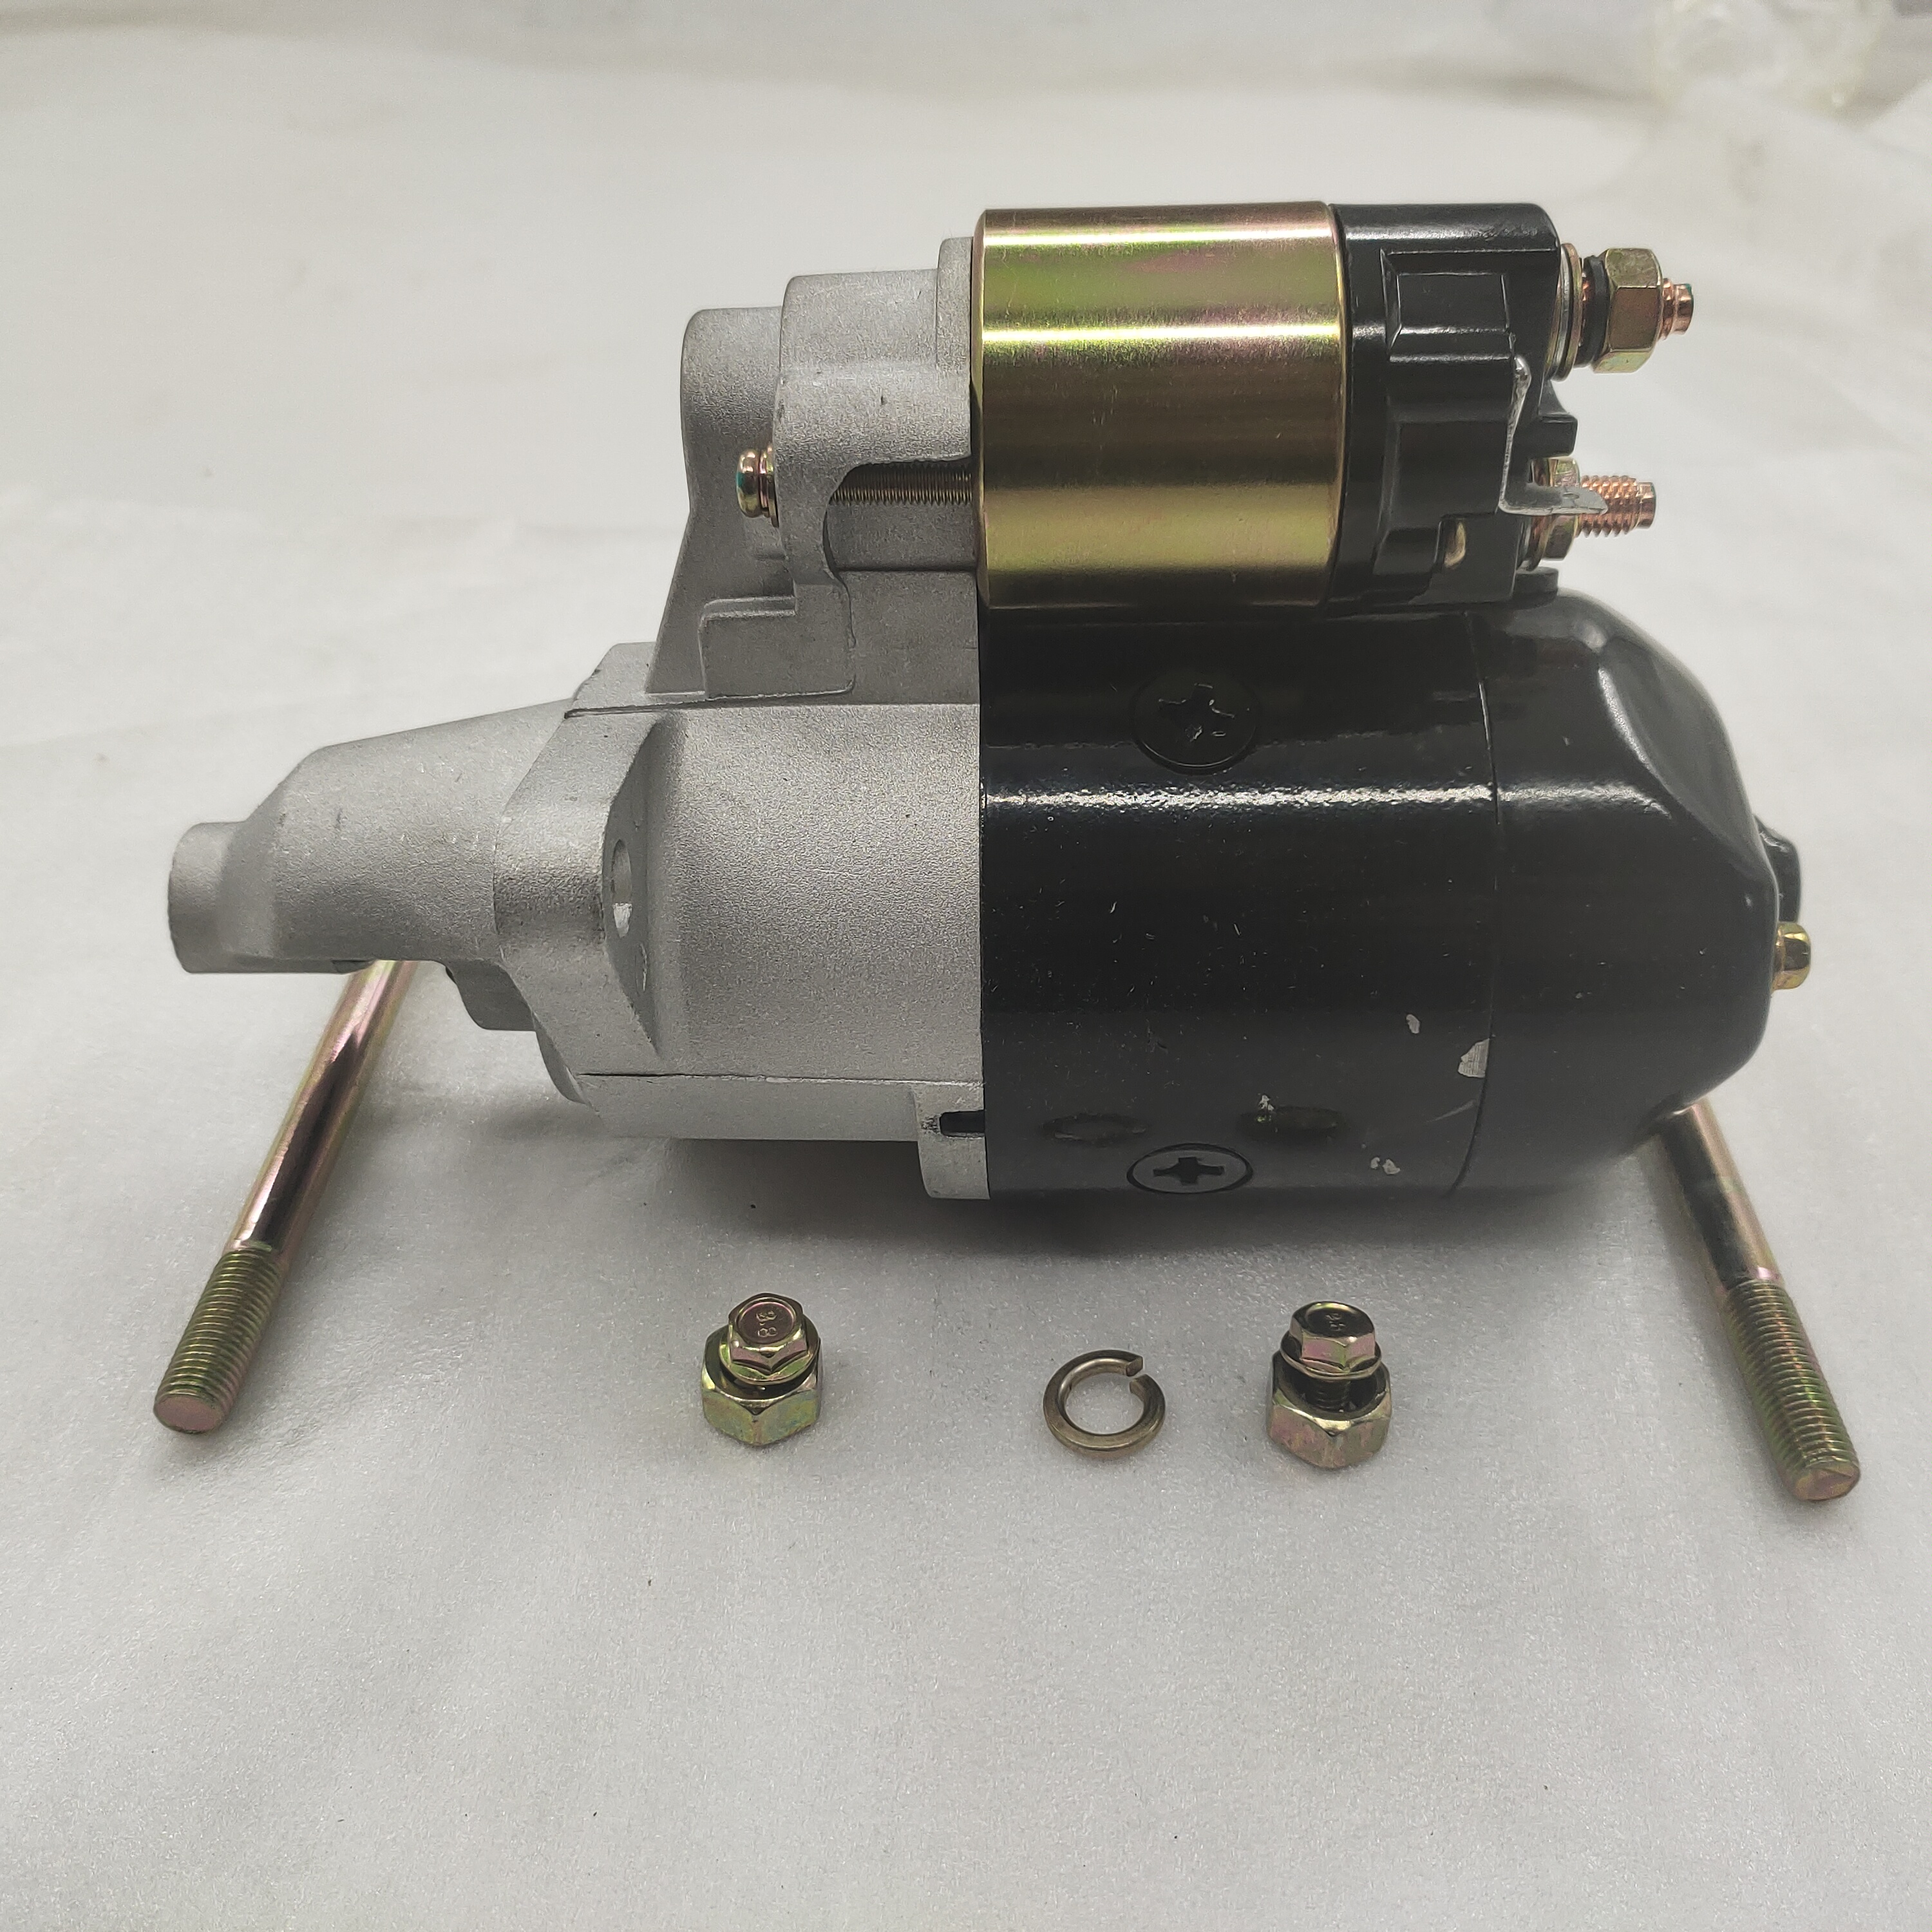 DAYANG motorcycle 800cc  Auto engine  starting motor  heavy duty tricycle engine starter parts high quality factory direct sale